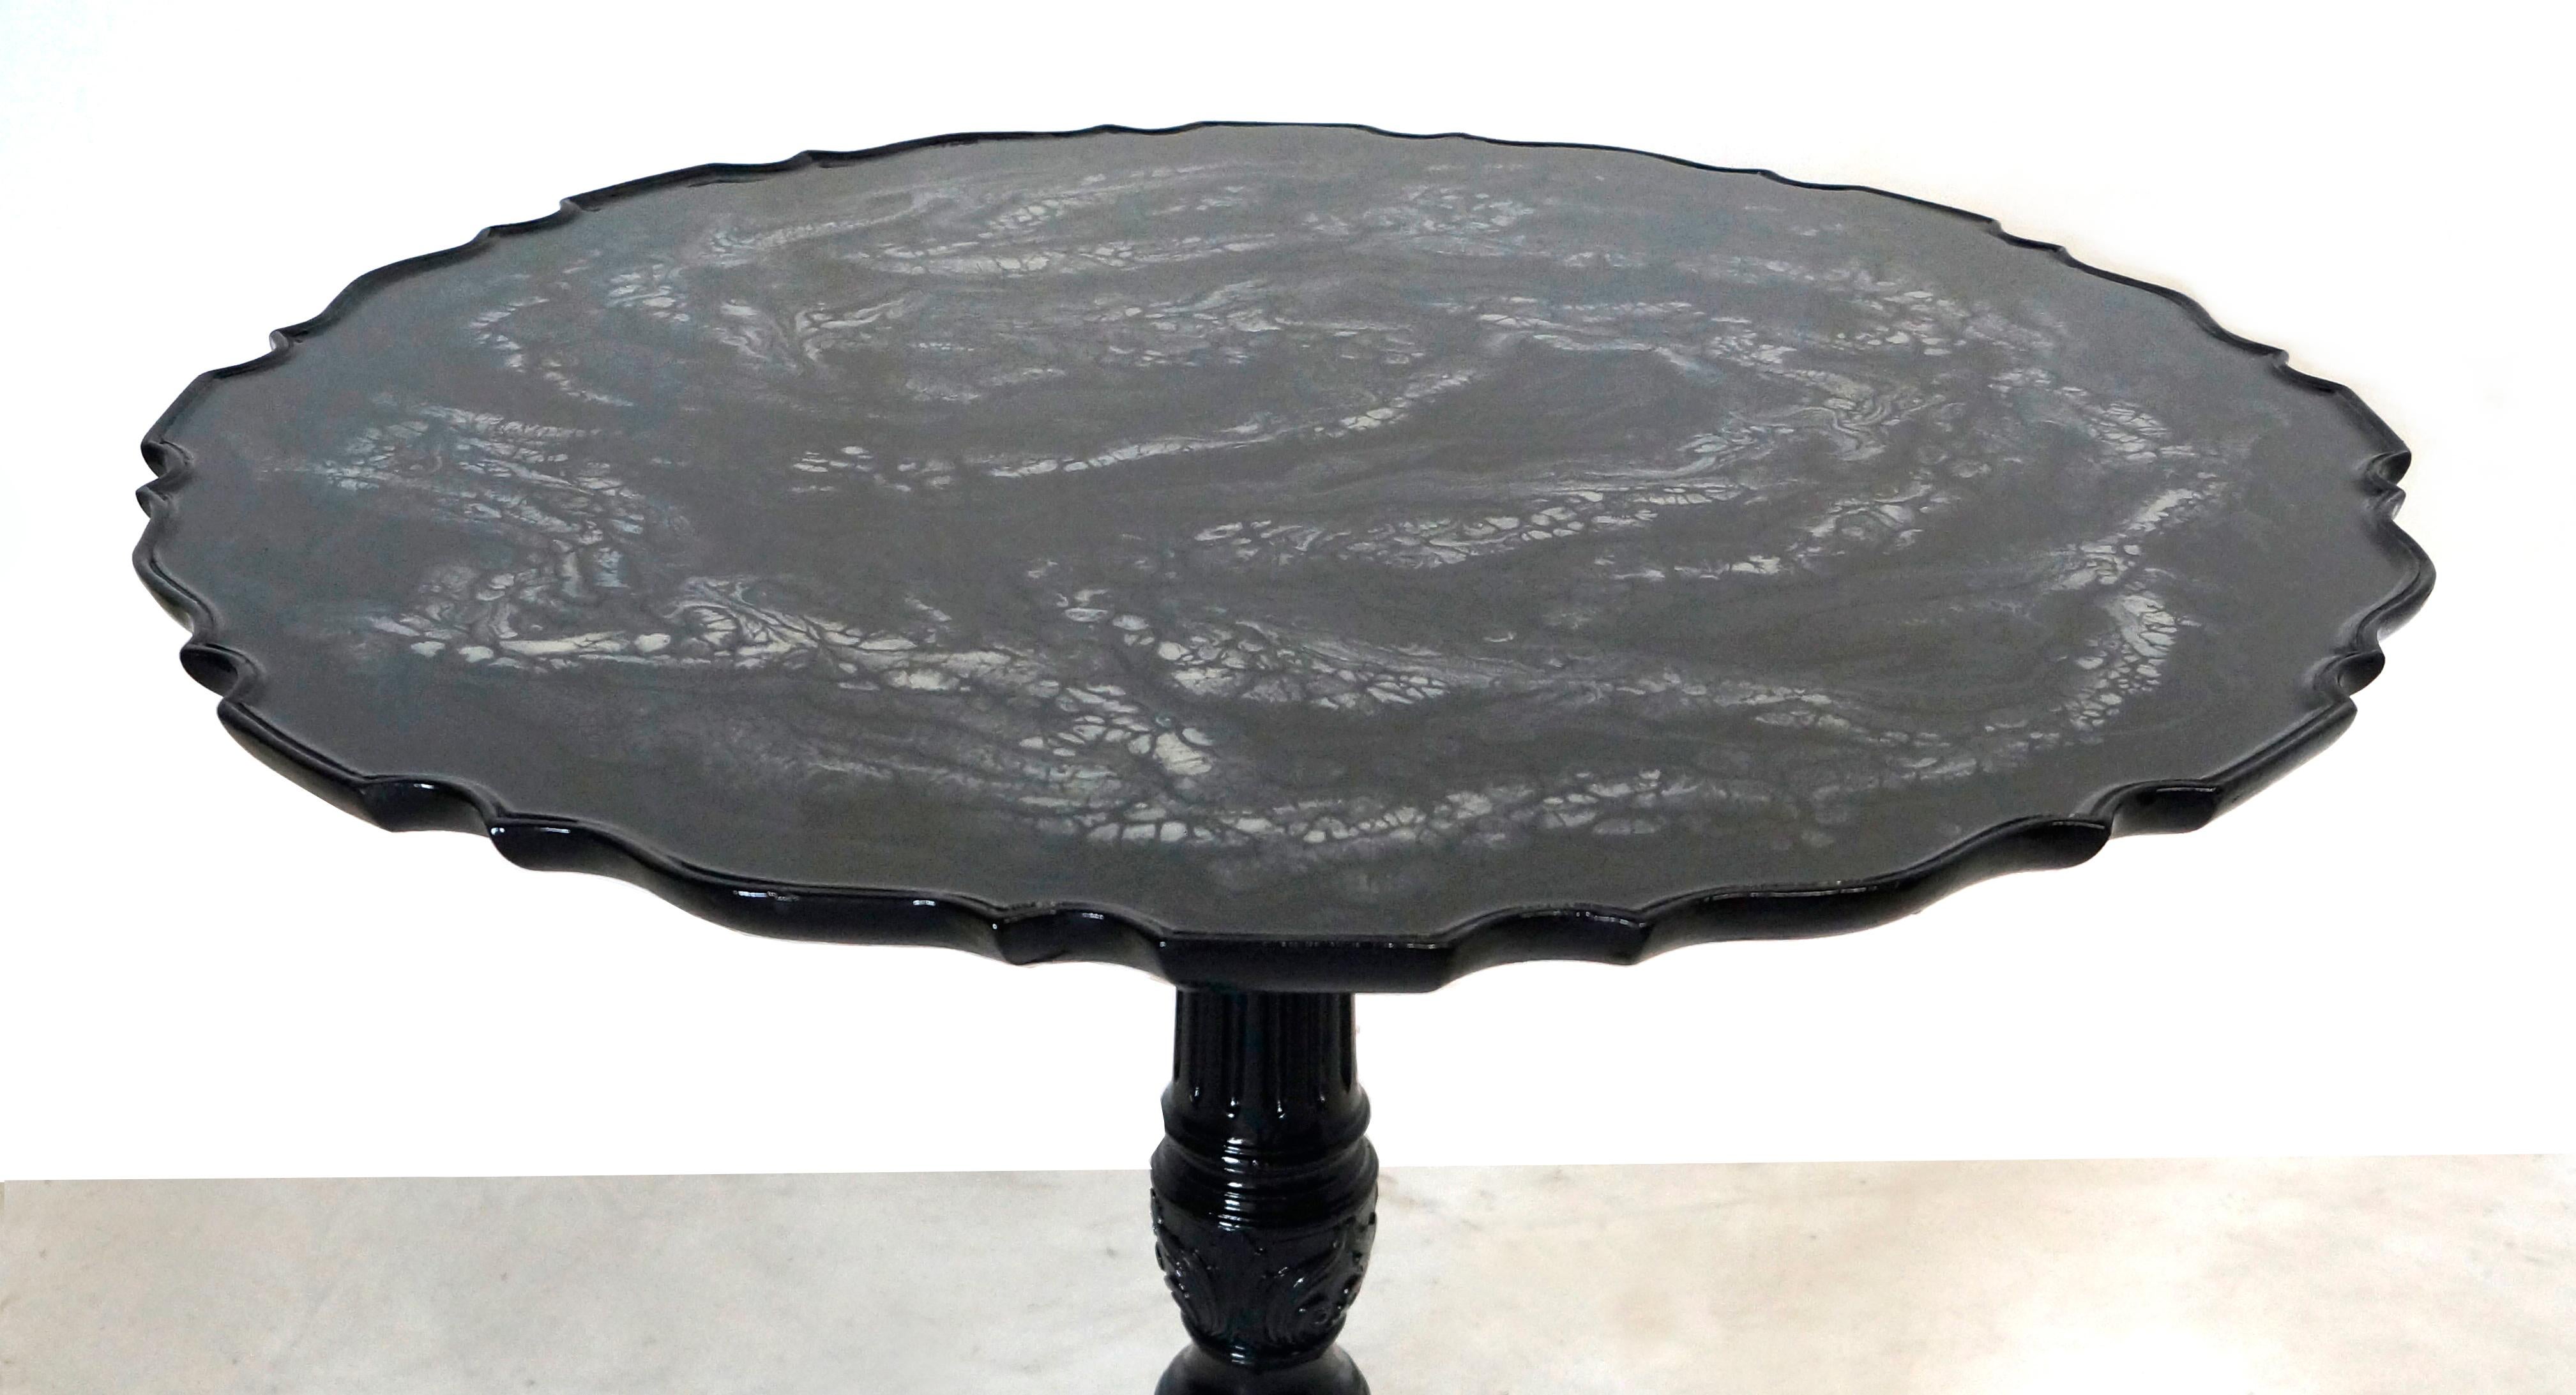 Original English 19th century gueridon customized with a black and silver resin coat on the top. Original hand carved, the base is lacquered in black.
Contemporary finish for this antique piece.